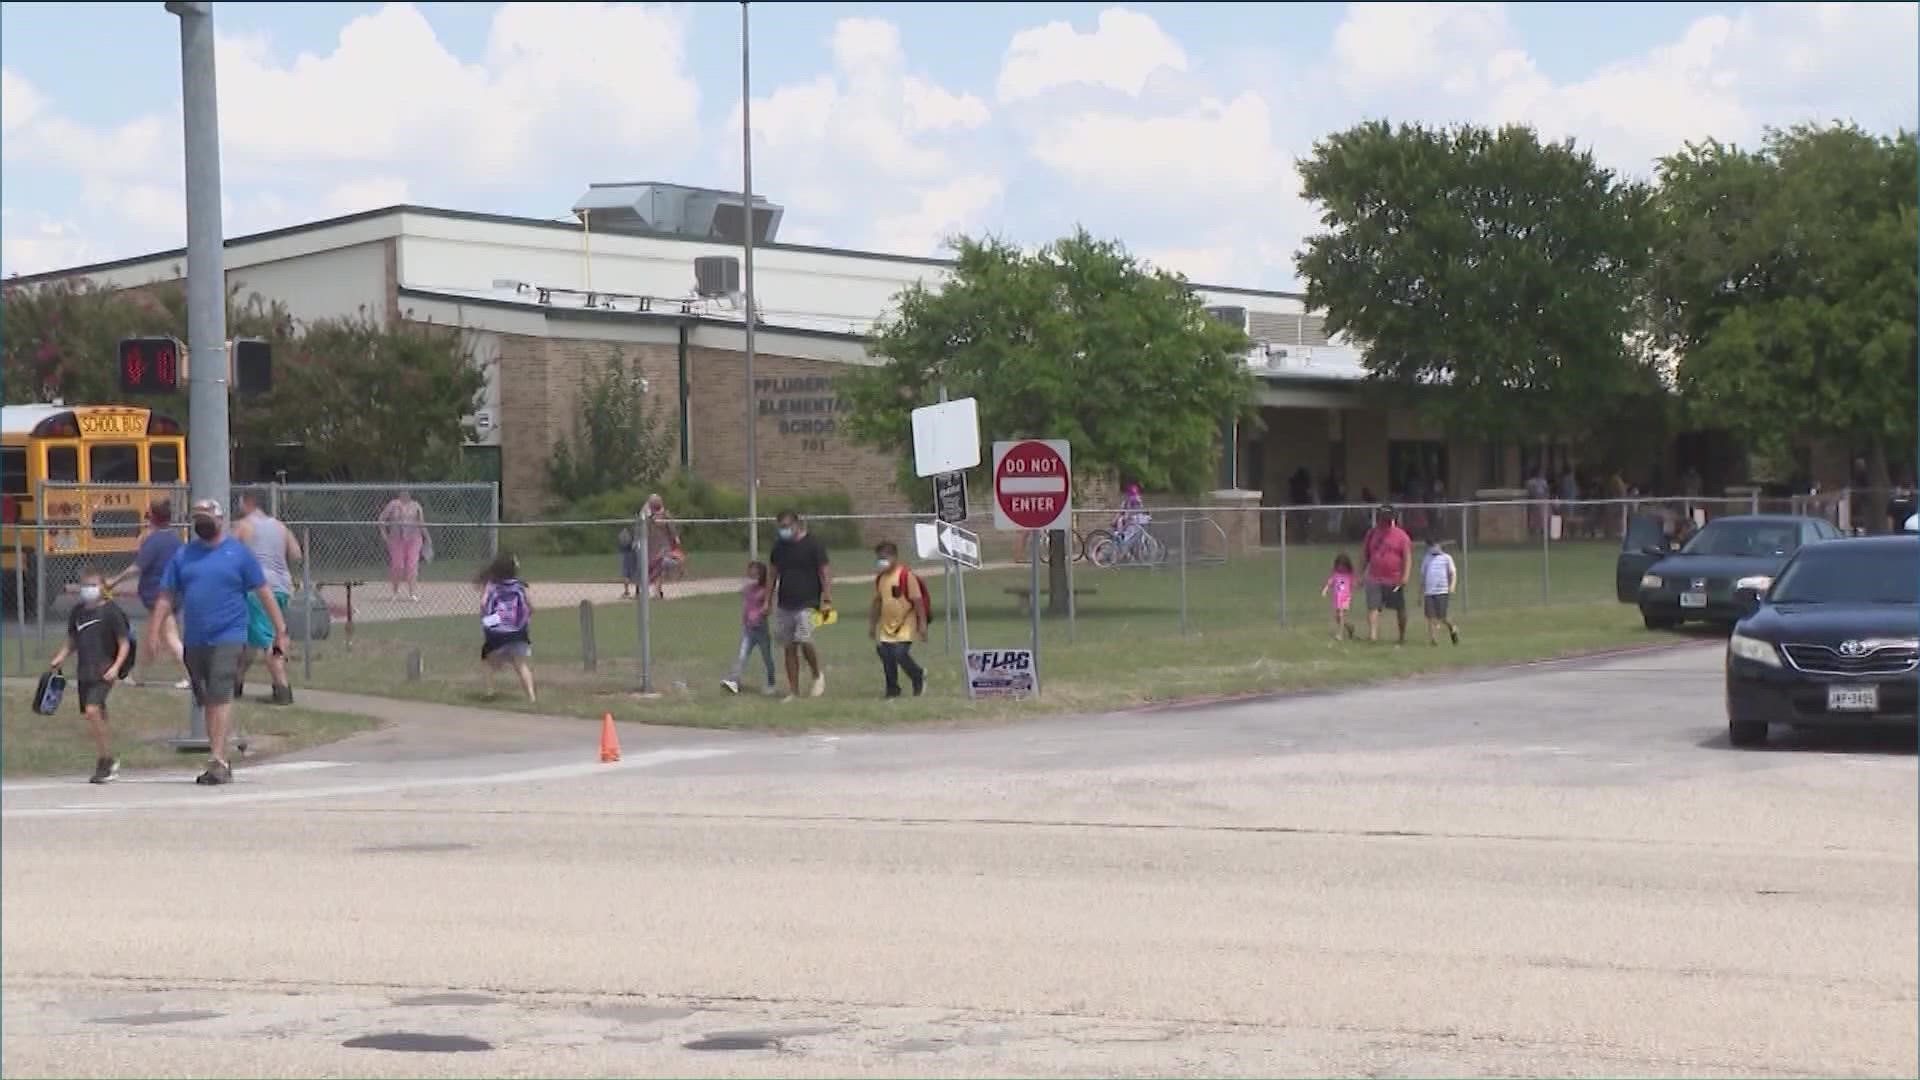 Pflugerville ISD is facing tough decisions and potential school closures. But some parents say some schools are already too crowded.